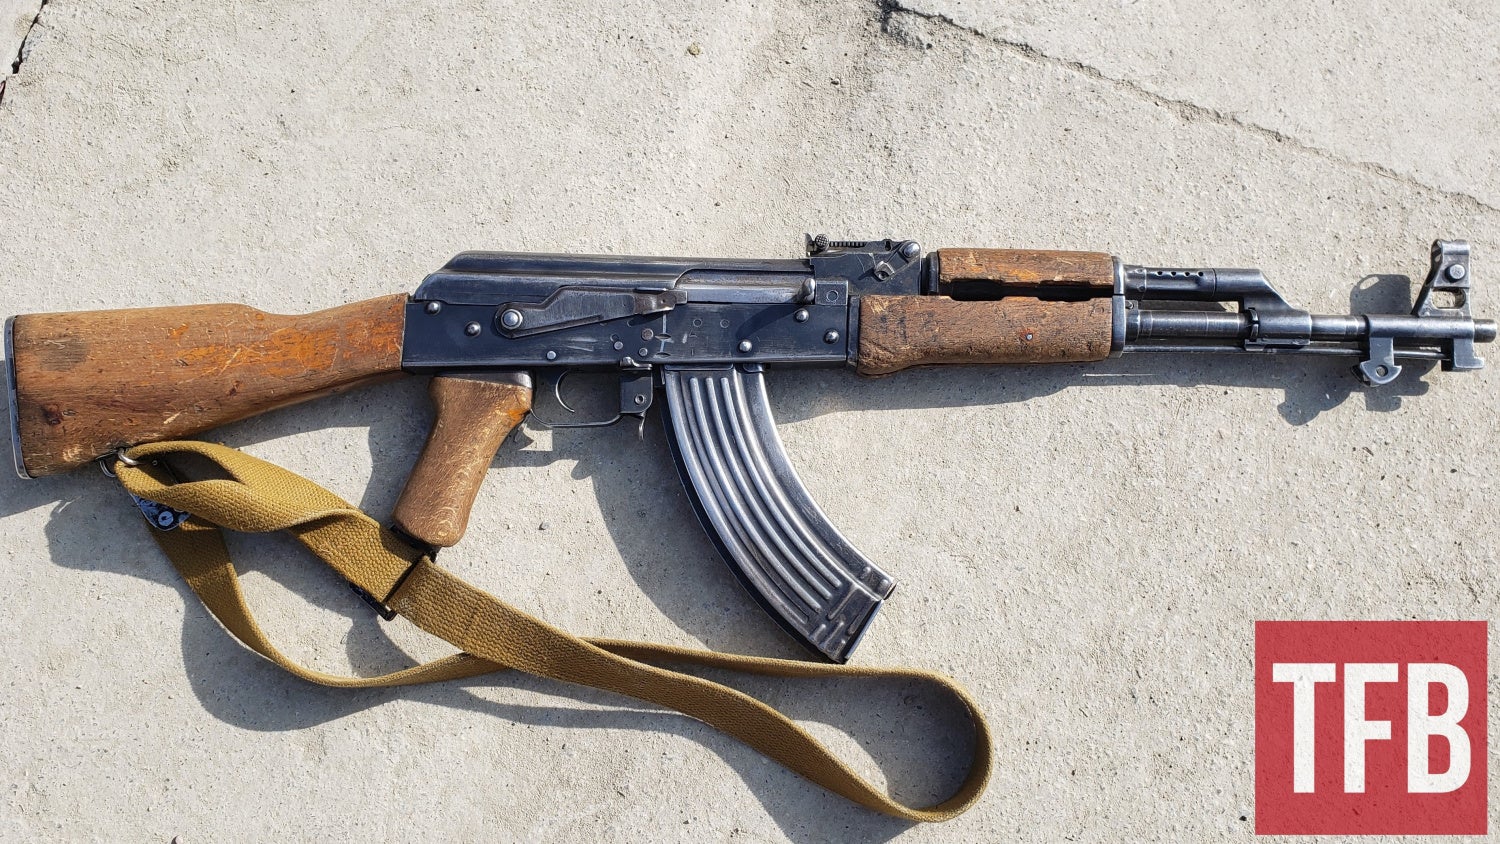 ASH-78 Albanian AK variant that author encountered in Kabul